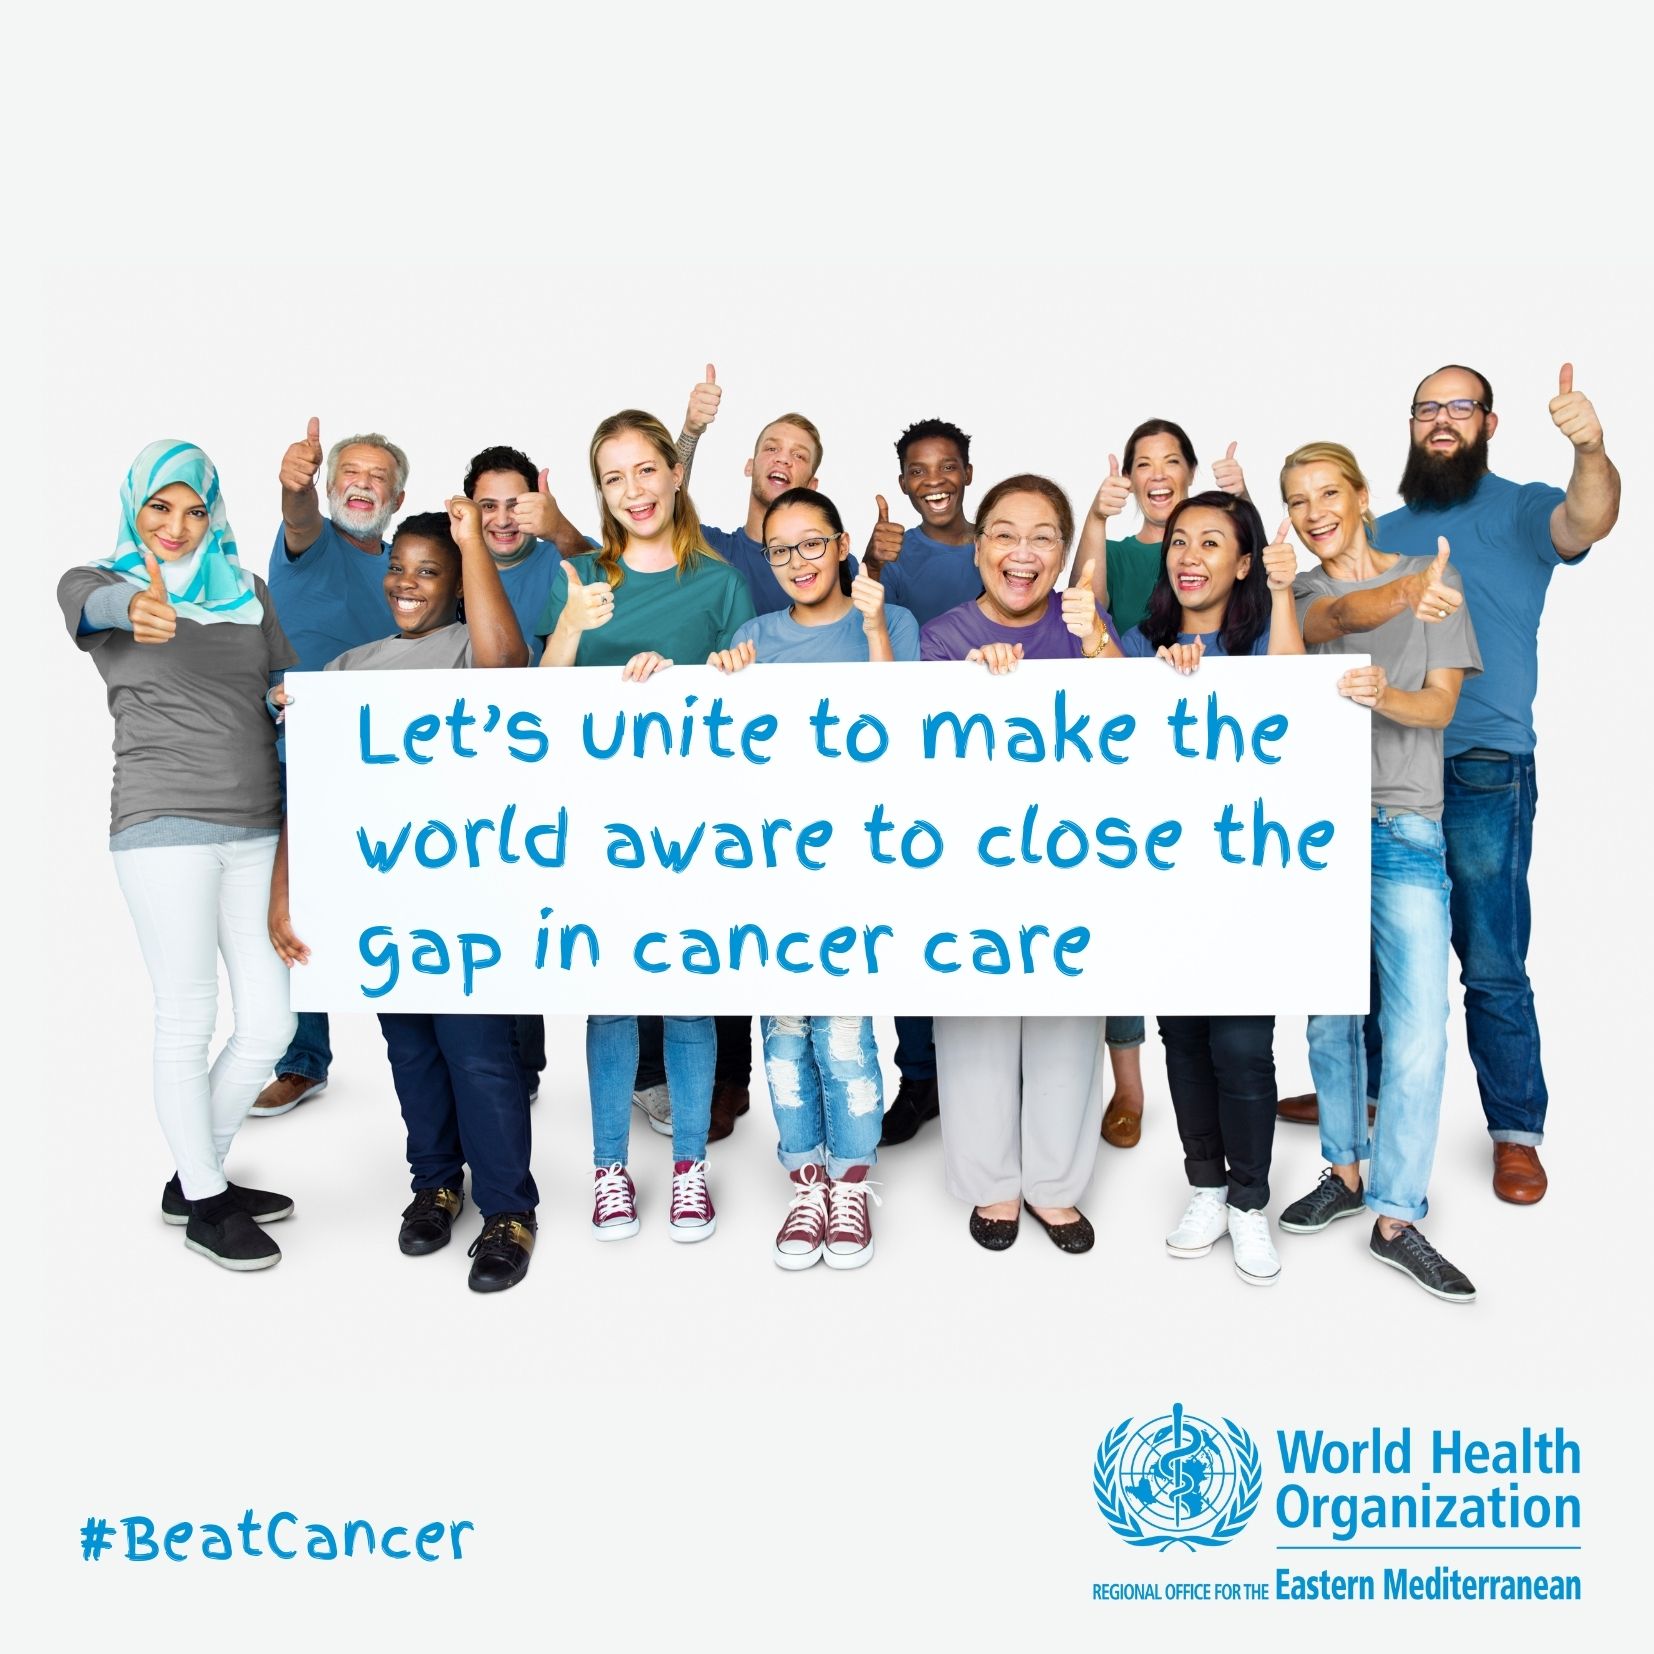 lets_unite_to_make_the_world_aware_to_close_the_gap_in_cancer_care.jpg